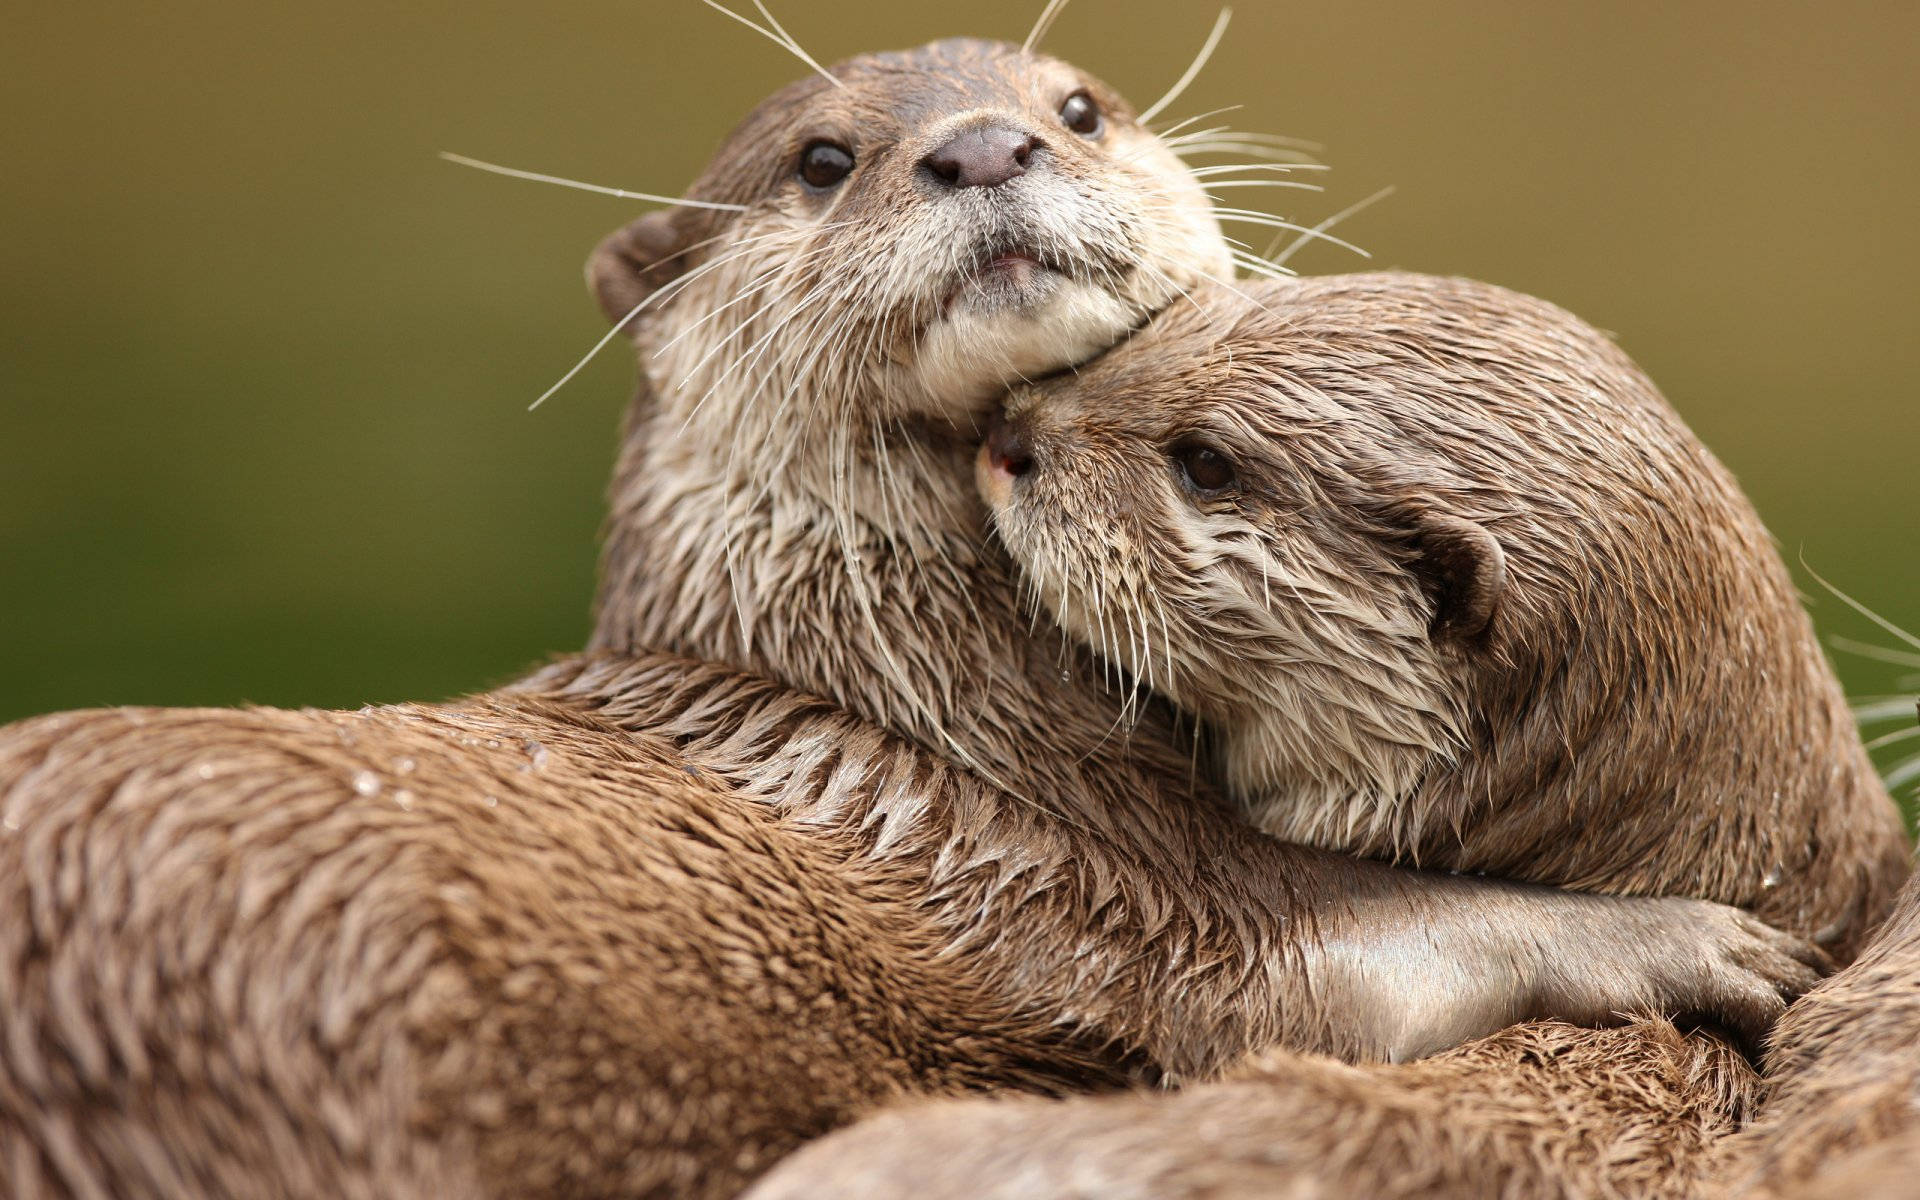 A loving otter couple embracing each other Wallpaper